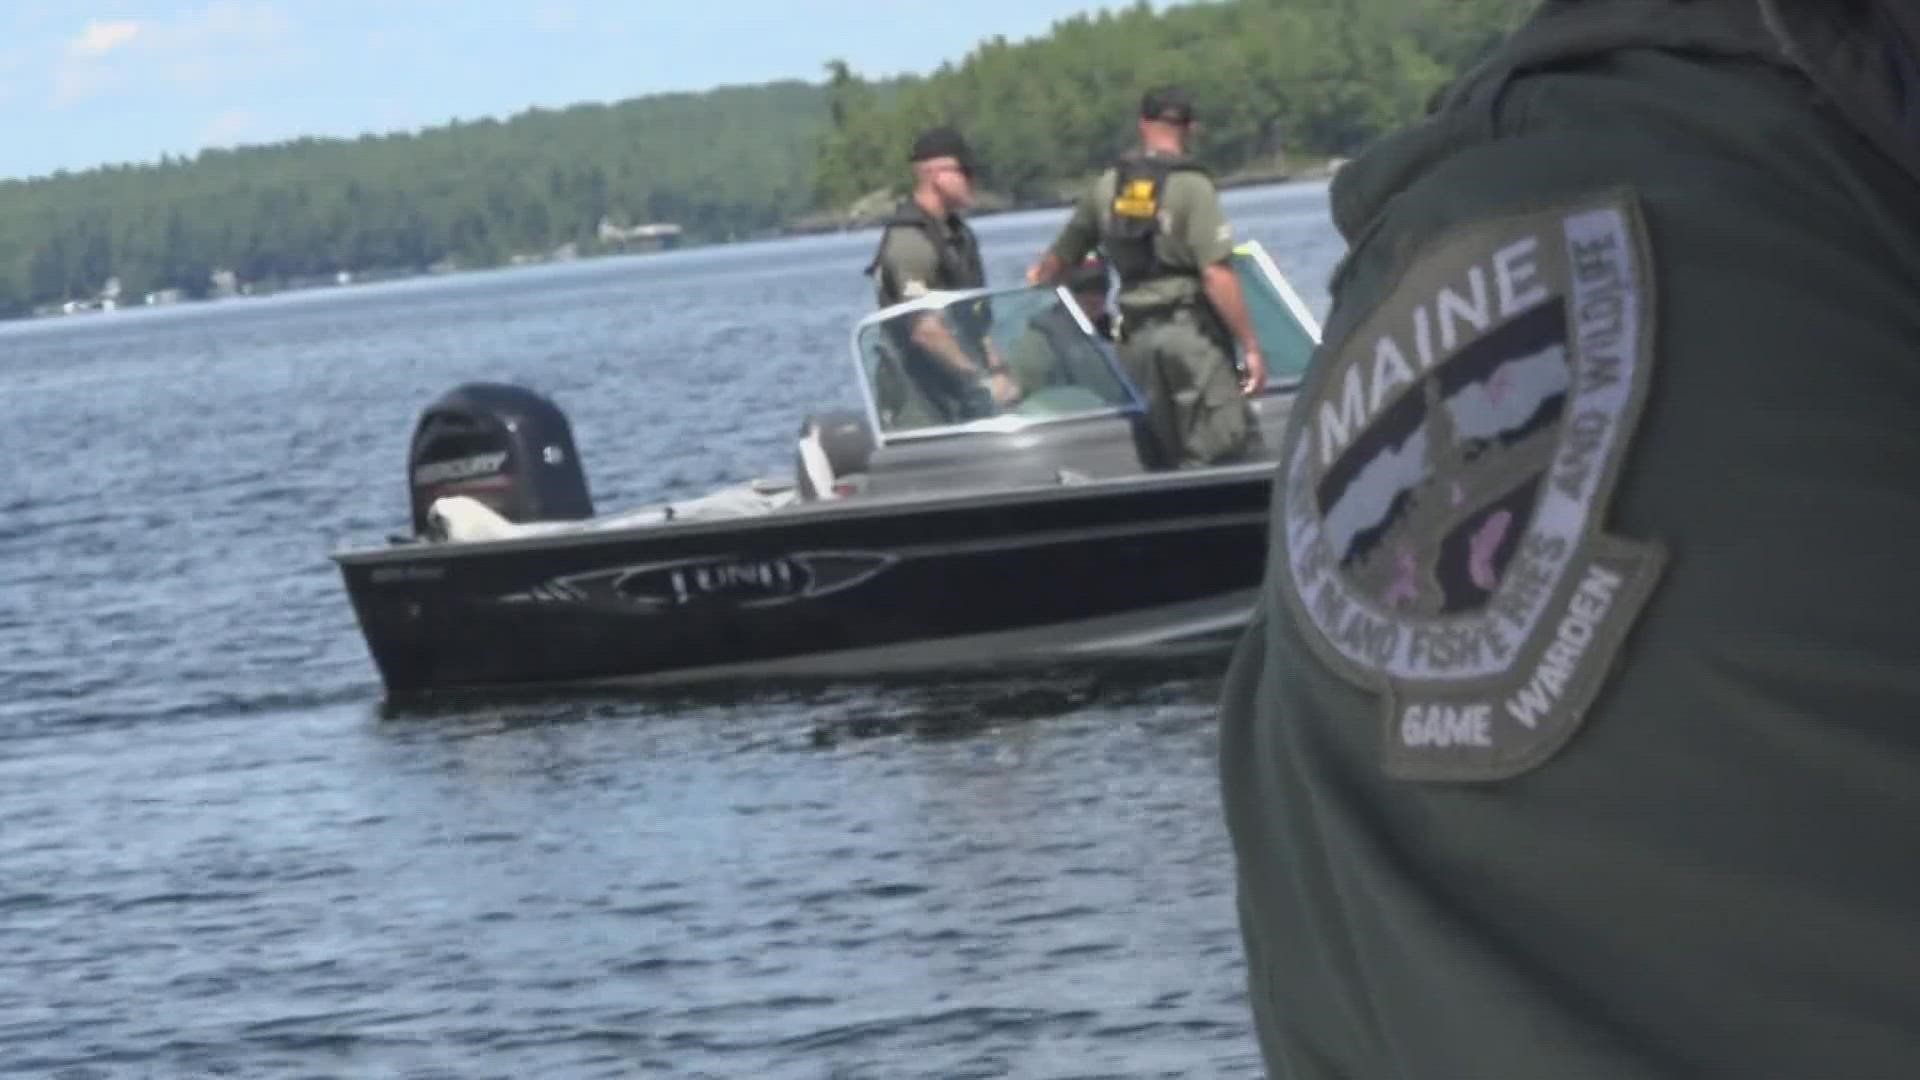 Graduates not enough to ease Maine's game warden shortage